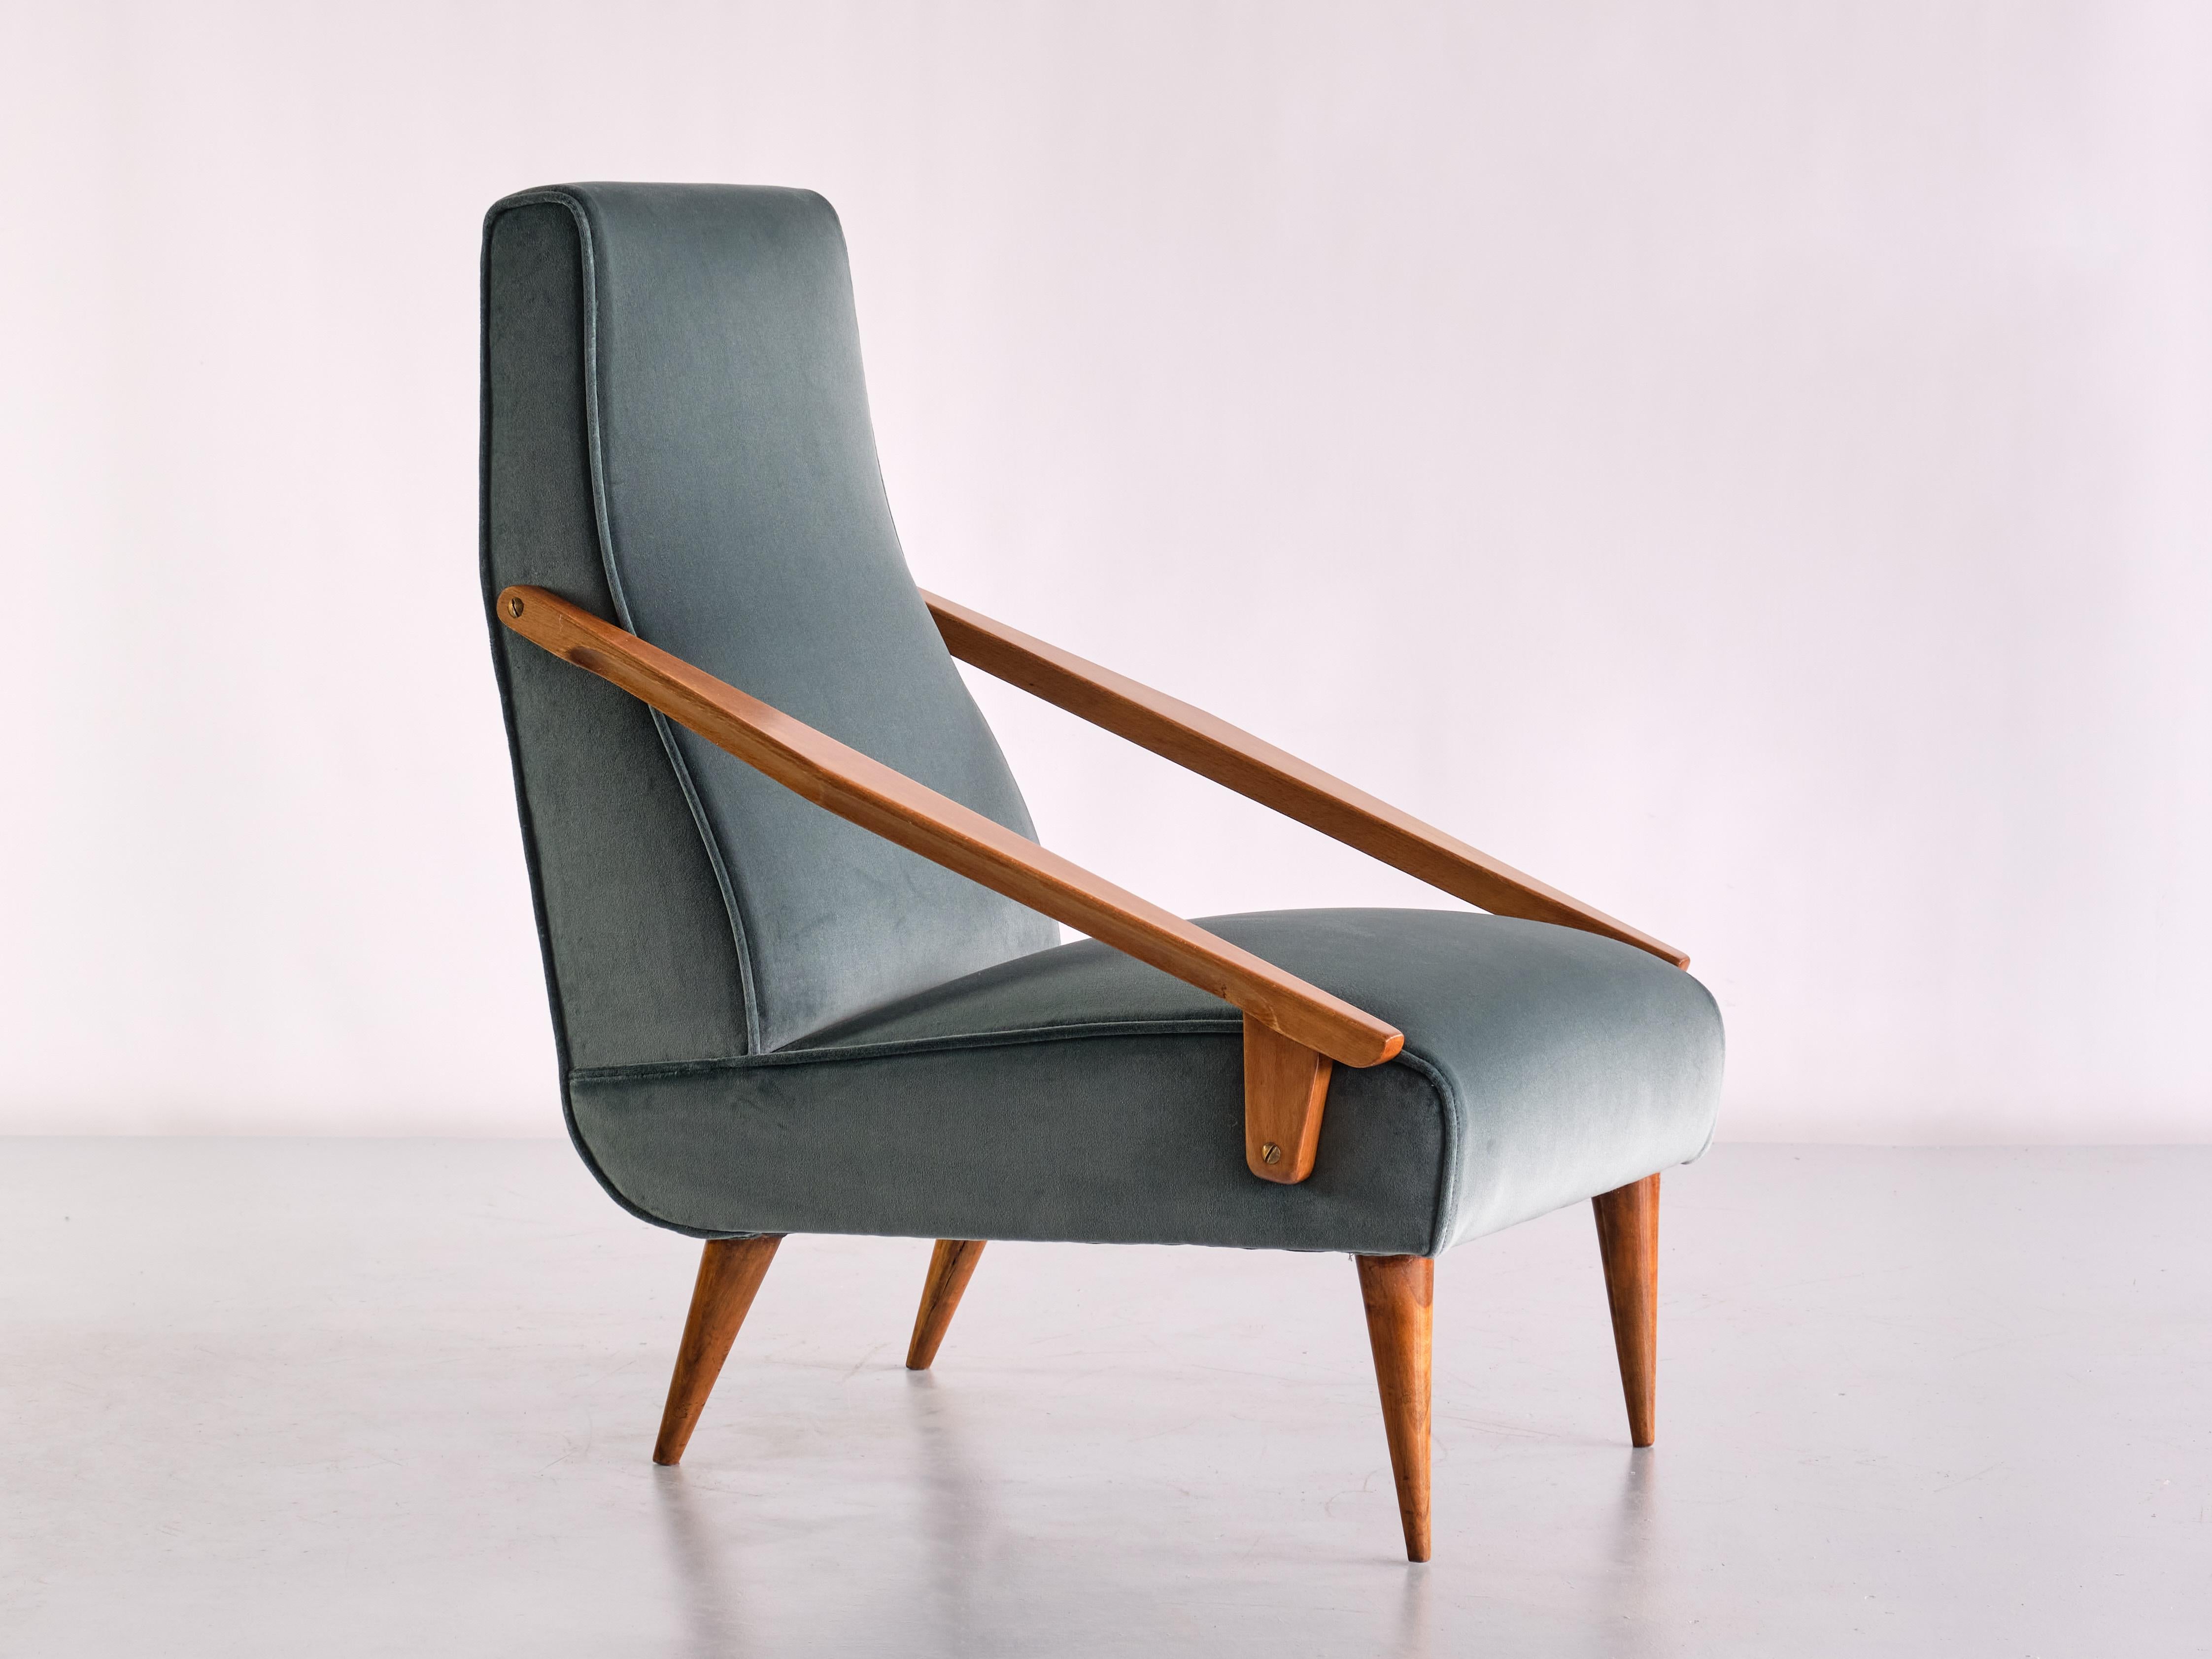 This rare armchair was designed by Gio Ponti and produced by Boucher et Fils in France in 1955. The striking design is marked by the geometric shape of the angled armrests and the tapered, conical legs, all in solid ash wood. The subtle lines of the